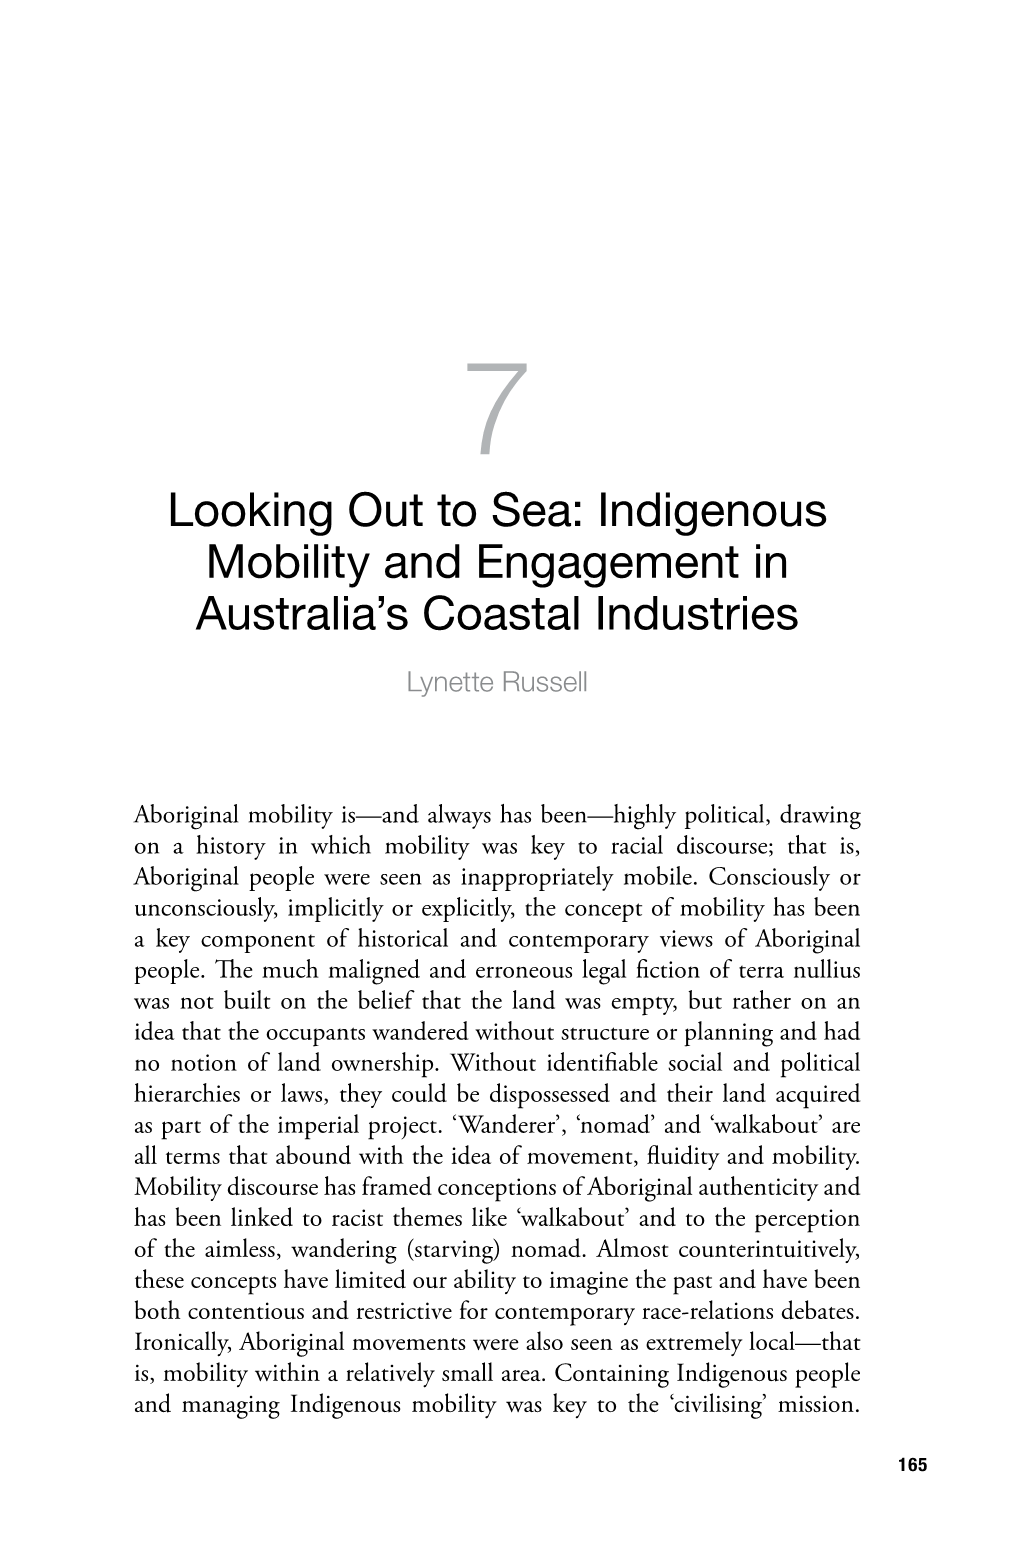 Indigenous Mobility and Engagement in Australia's Coastal Industries